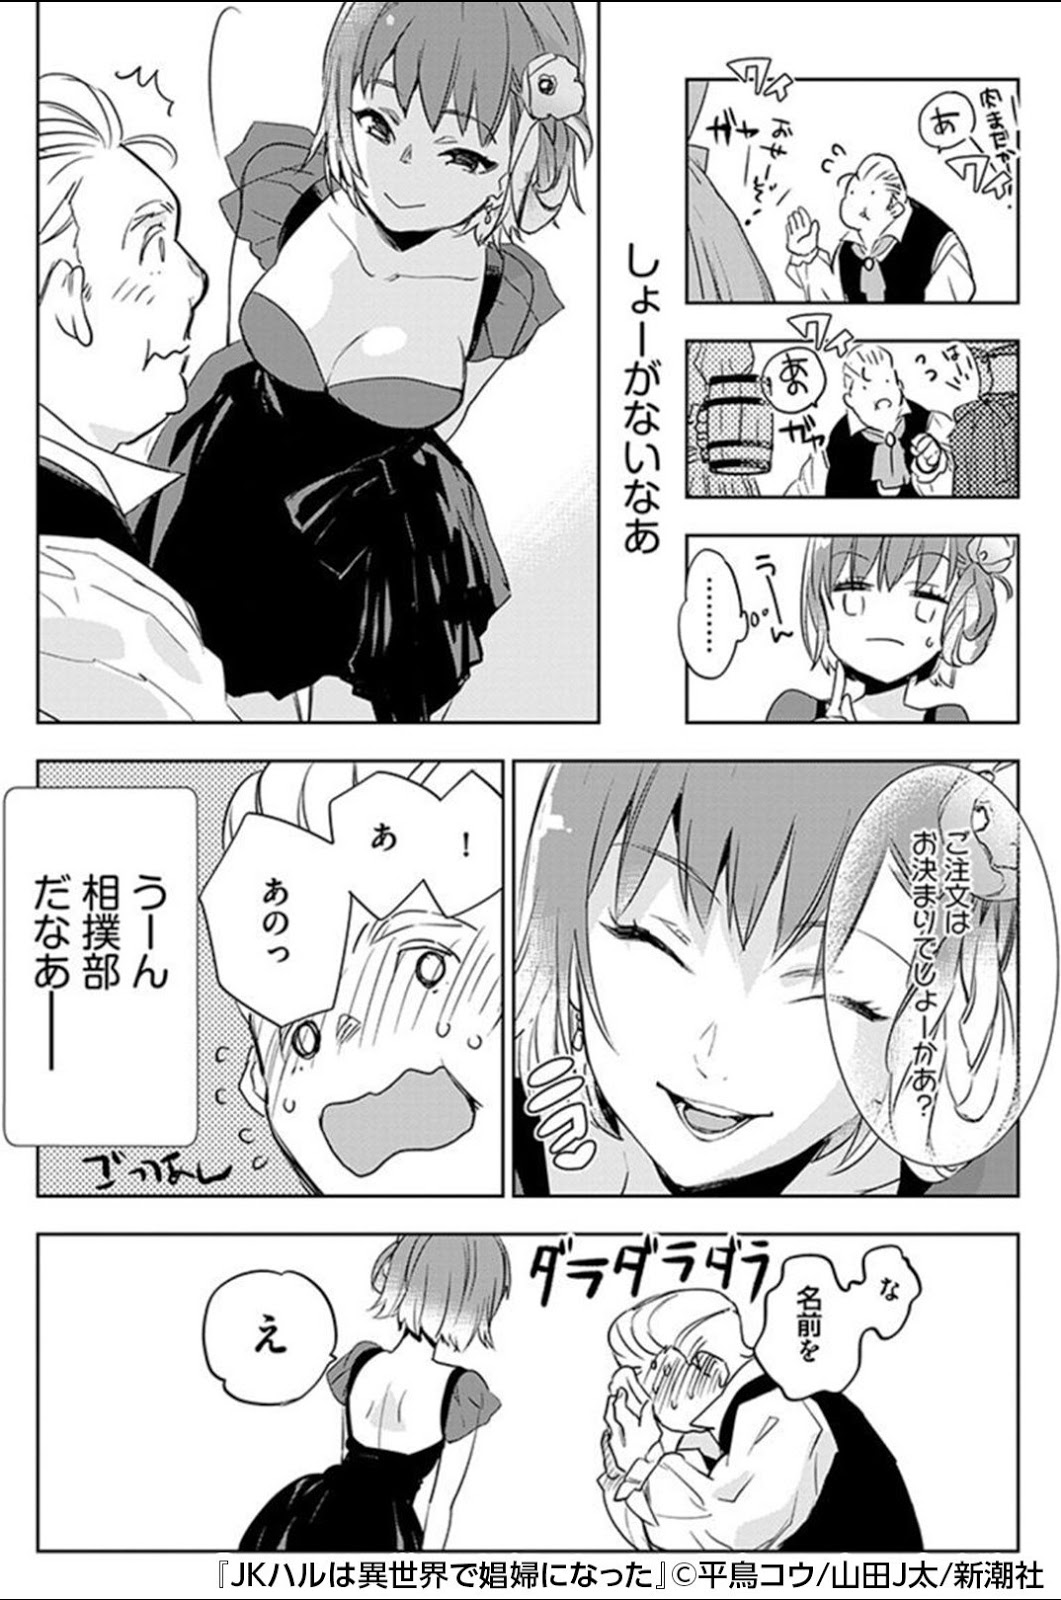 Manga page showing a cheerful girl walking up to a man and talking to him. He gets flustered.